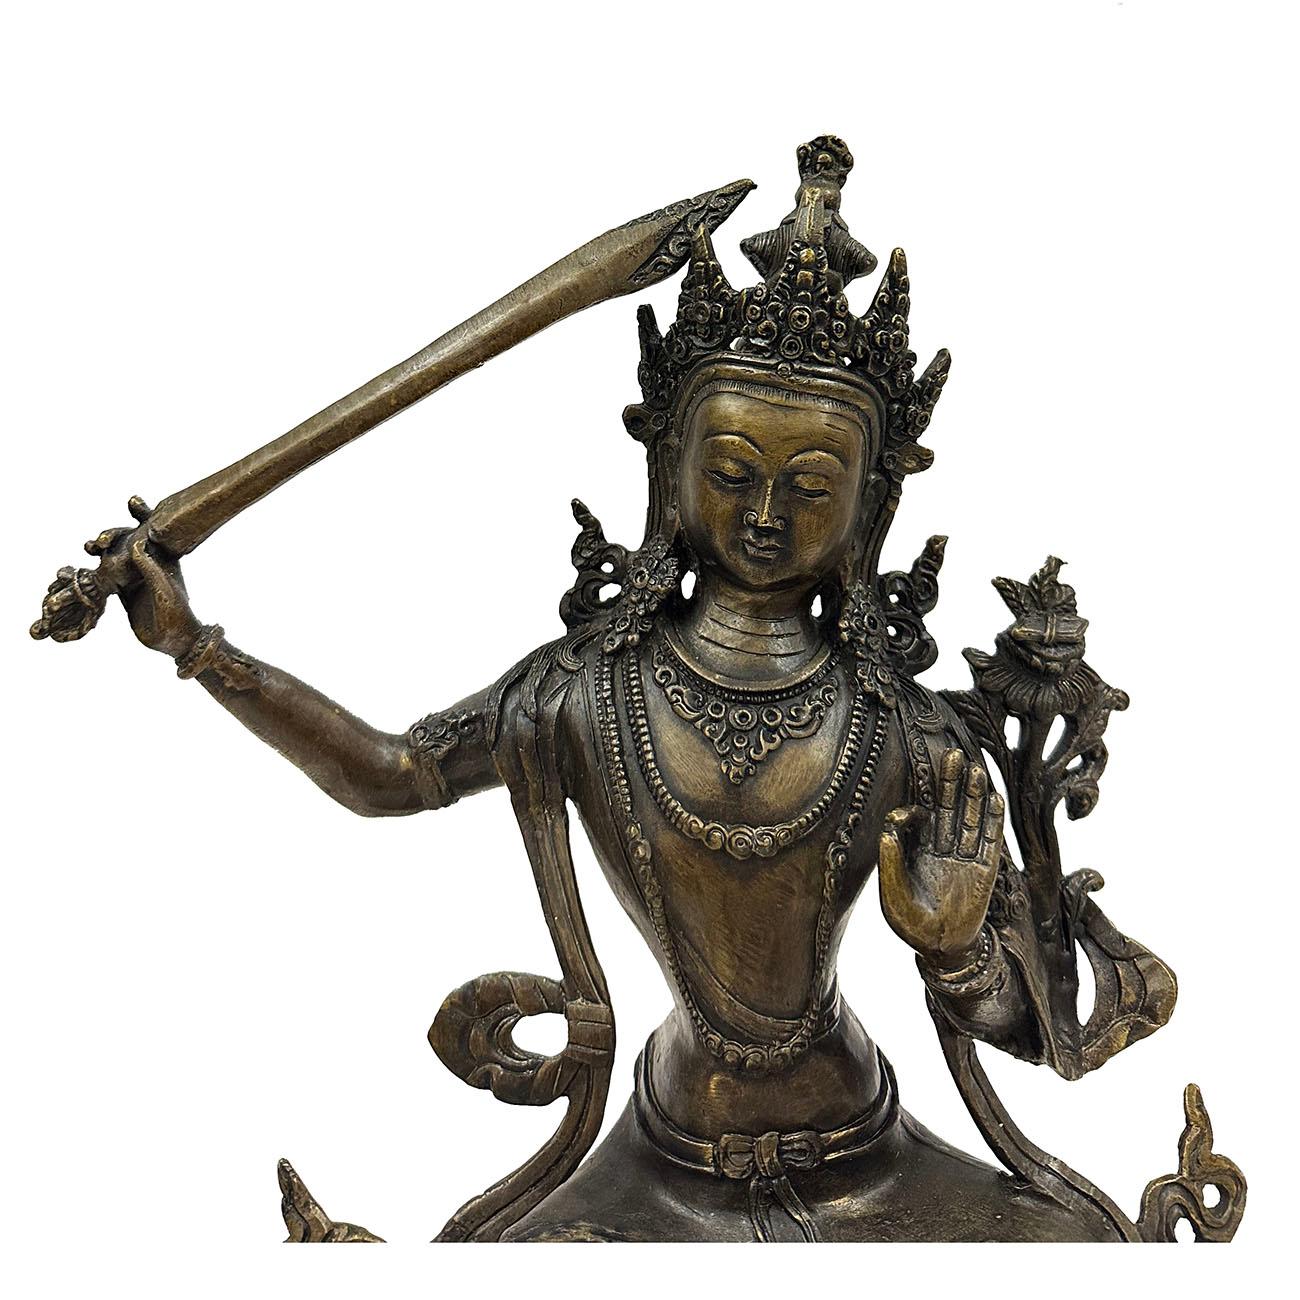 Manjushri is the Bodhisattva of keen awareness in Buddhism. A disciple of the historical Buddha Shakyamuni, he represents wisdom, intelligence and realization, and is one of the most popular Bodhisattvas following Avalokitesvara. Look at this